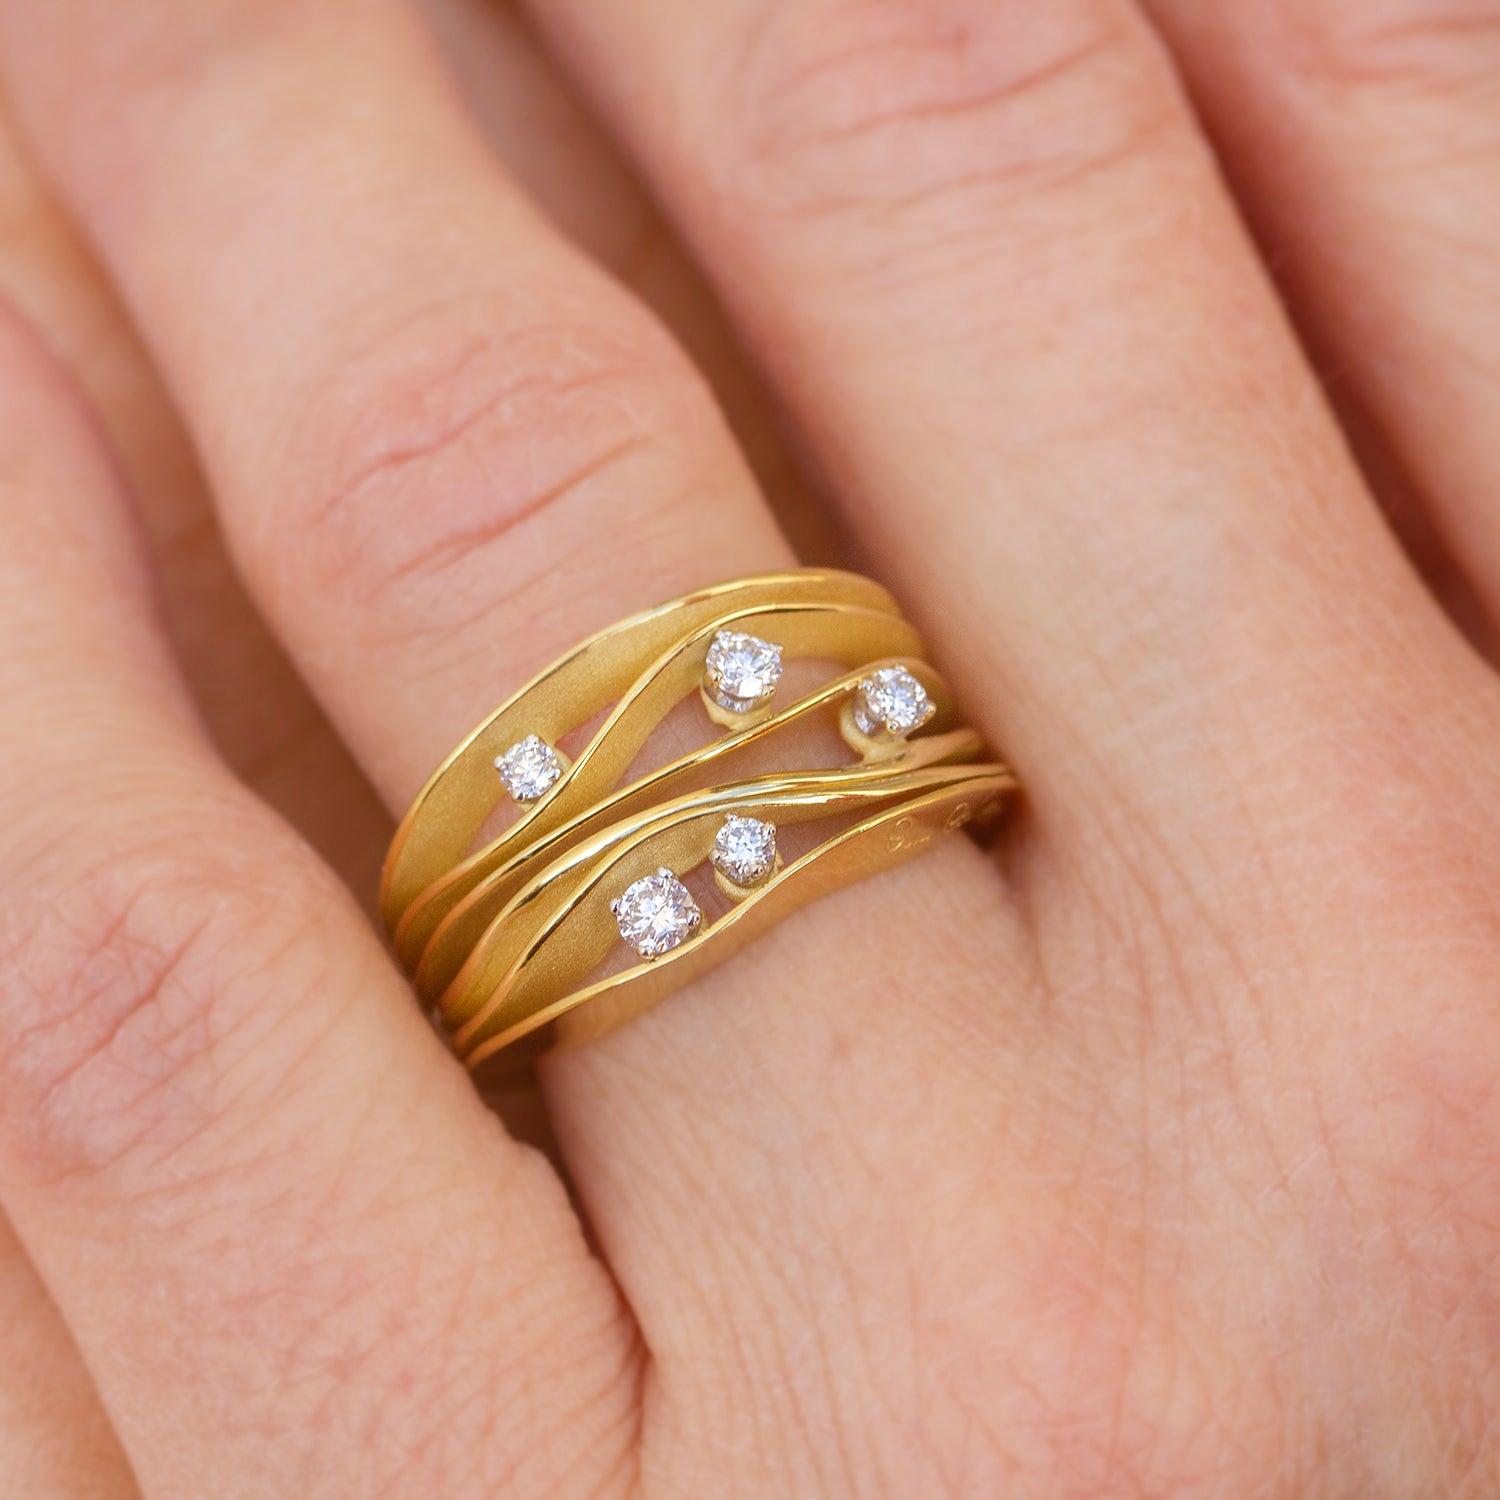 For Sale:  Annamaria Cammilli Dune Ring with Five Diamonds in 18k Yellow Lemon Bamboo Gold 11